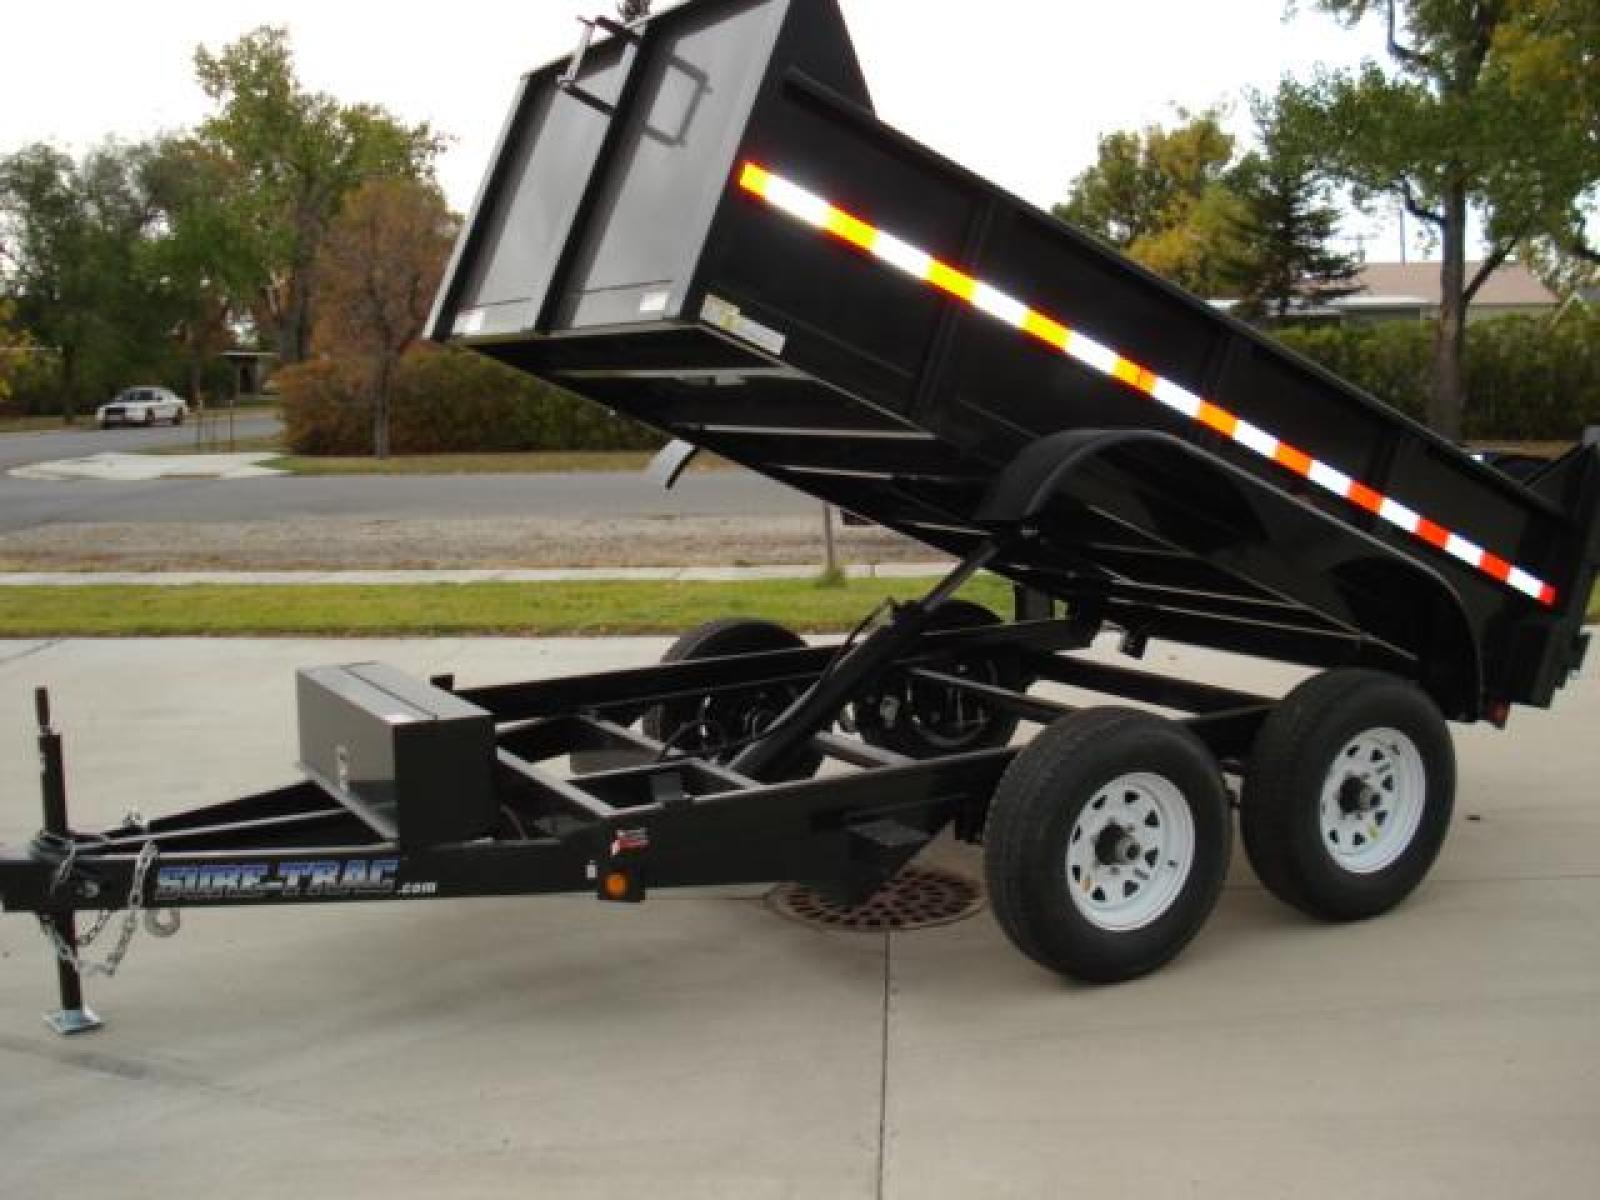 2022 Black SureTrac 6 x10 Lo Pro Dump Trailer , located at 310 West 1st Ave, Big Timber, MT, 59011, (406) 860-8510, 45.833511, -109.957809 - SURE-TRAC 6 X 10 LO PRO DUMP TRAILER, 10K GVW, SINGLE RAM HOIST, EZ LUBE HUBS, DUAL REAR GATE, BRAKES BOTH AXLES, EZ LUBE HUBS, (5) D-RING TIE-DOWNS, LED LIGHTS, POWDER COAT FINISH, REAR RAMPS, MESH TARP, DEEP CYCLE BATTERY. OPTIONS: SPARE TIRE $165.00. THE BEST TRAILERS AT THE BEST PRICE!!! - Photo #10